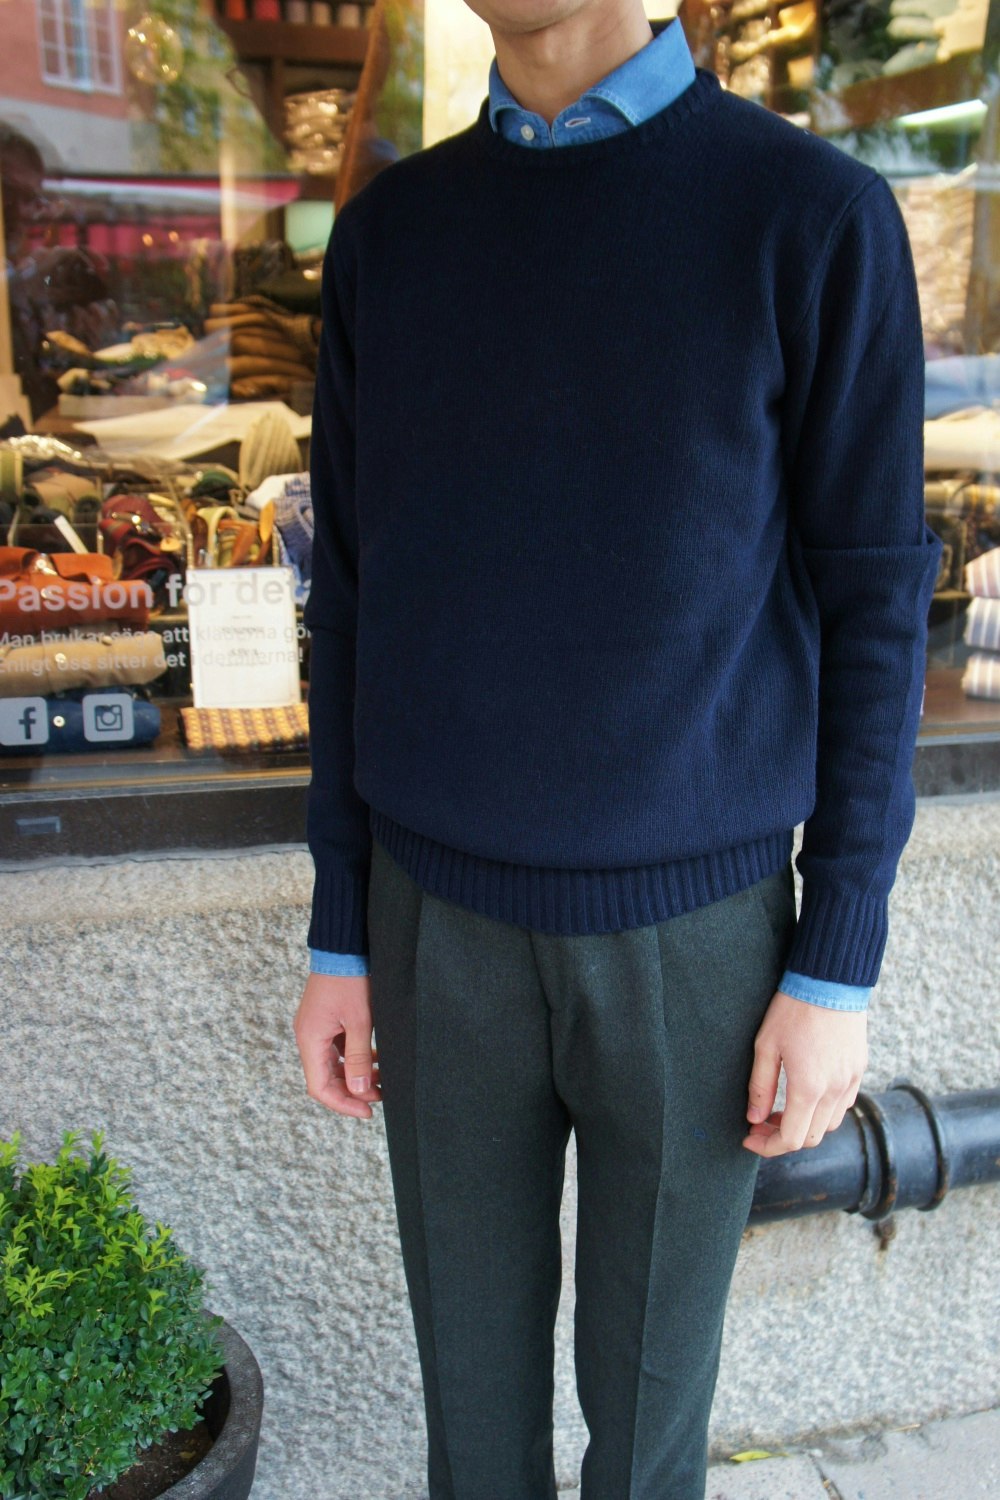 Chunky Cashmere/Wool Crewneck Pullover - Navy Blue